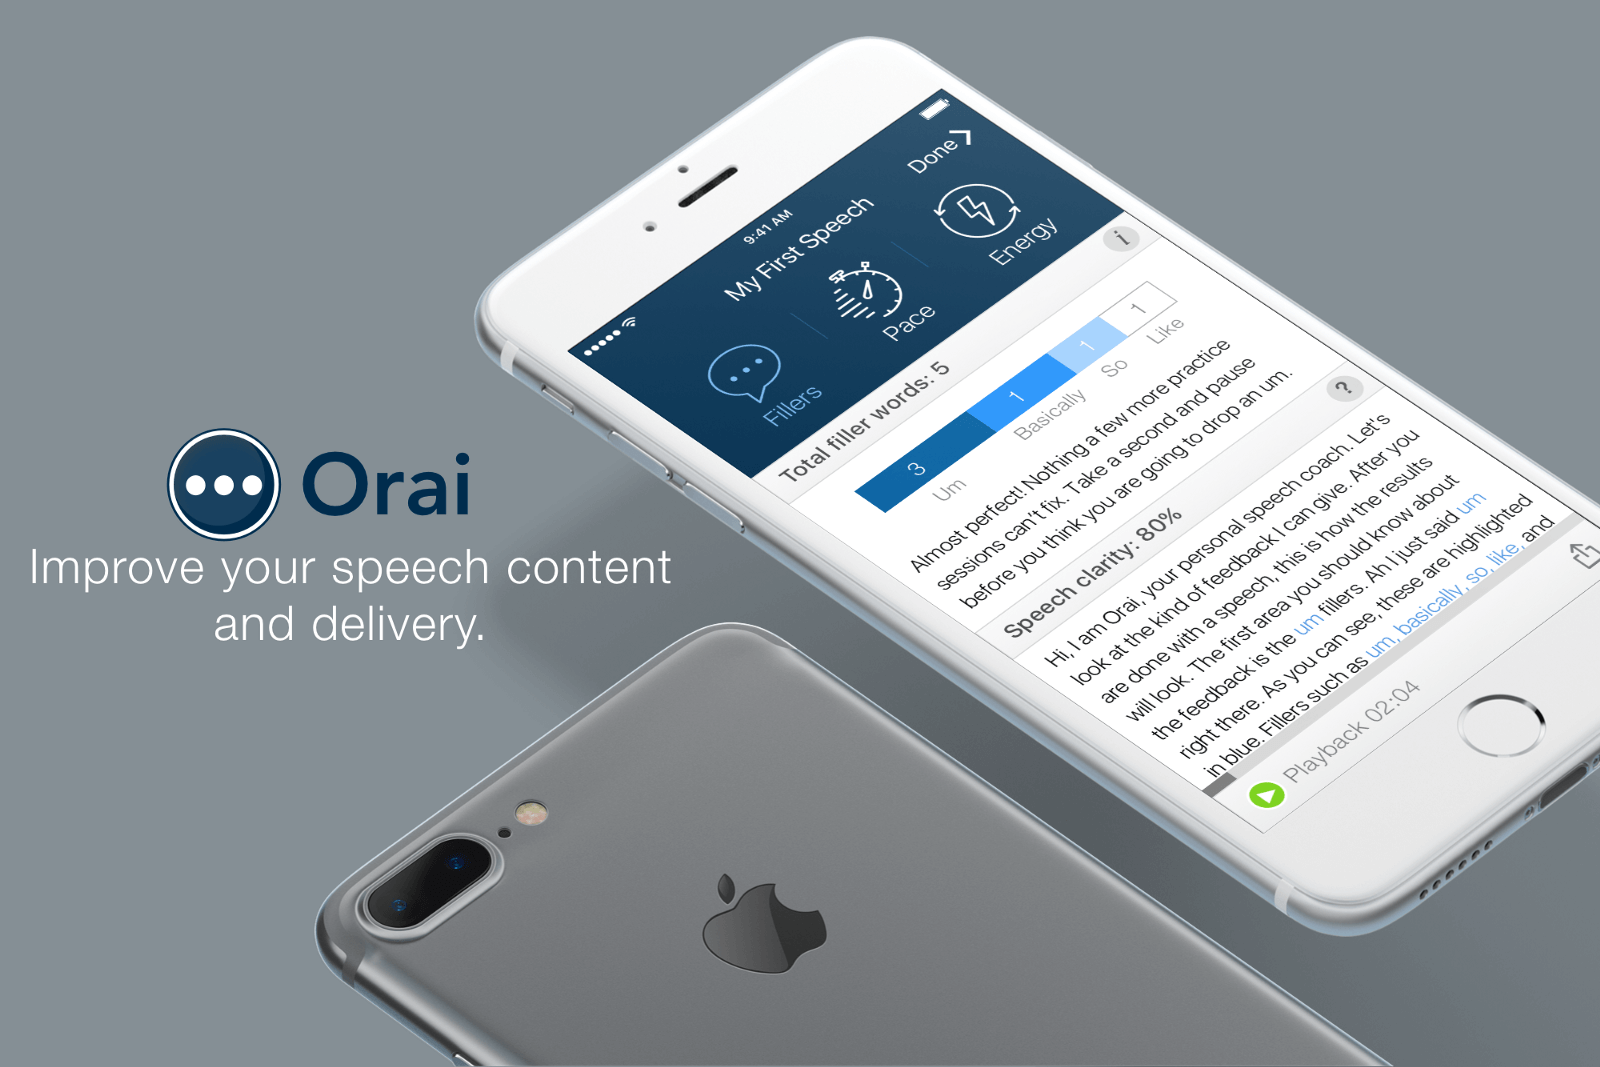 Orai - Improve your speech content and delivery